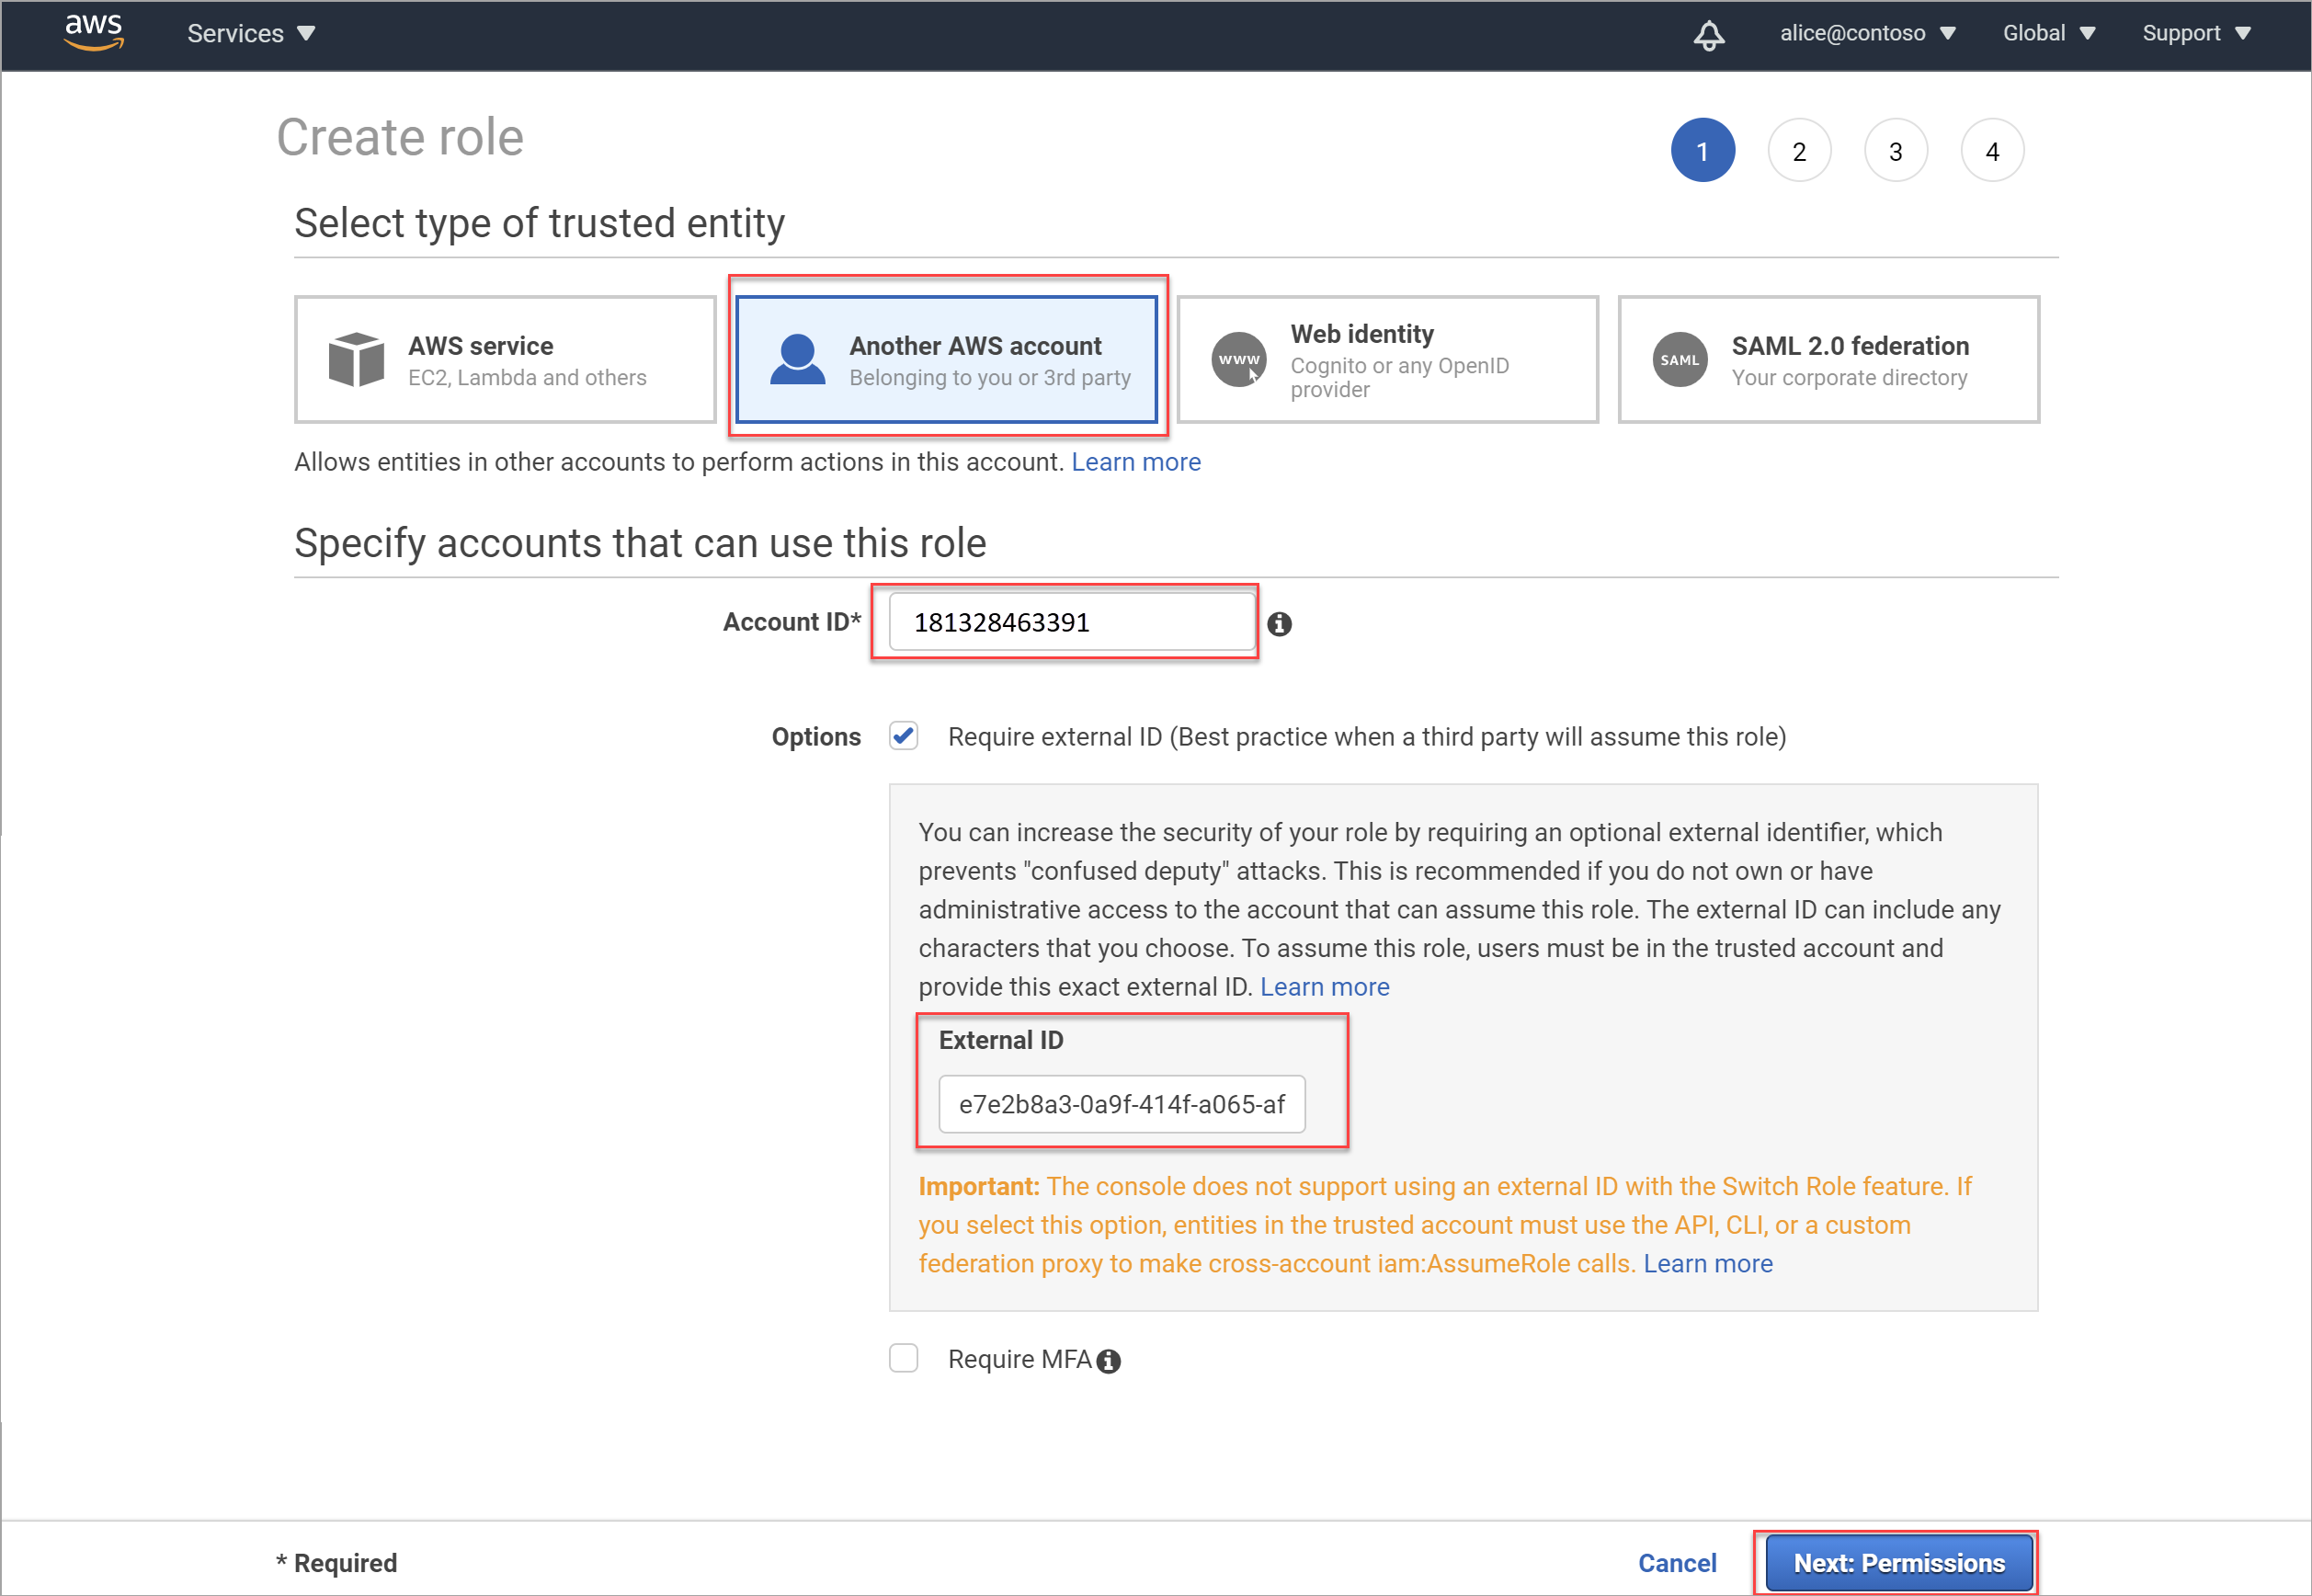 Add the Microsoft Account ID to your AWS account.